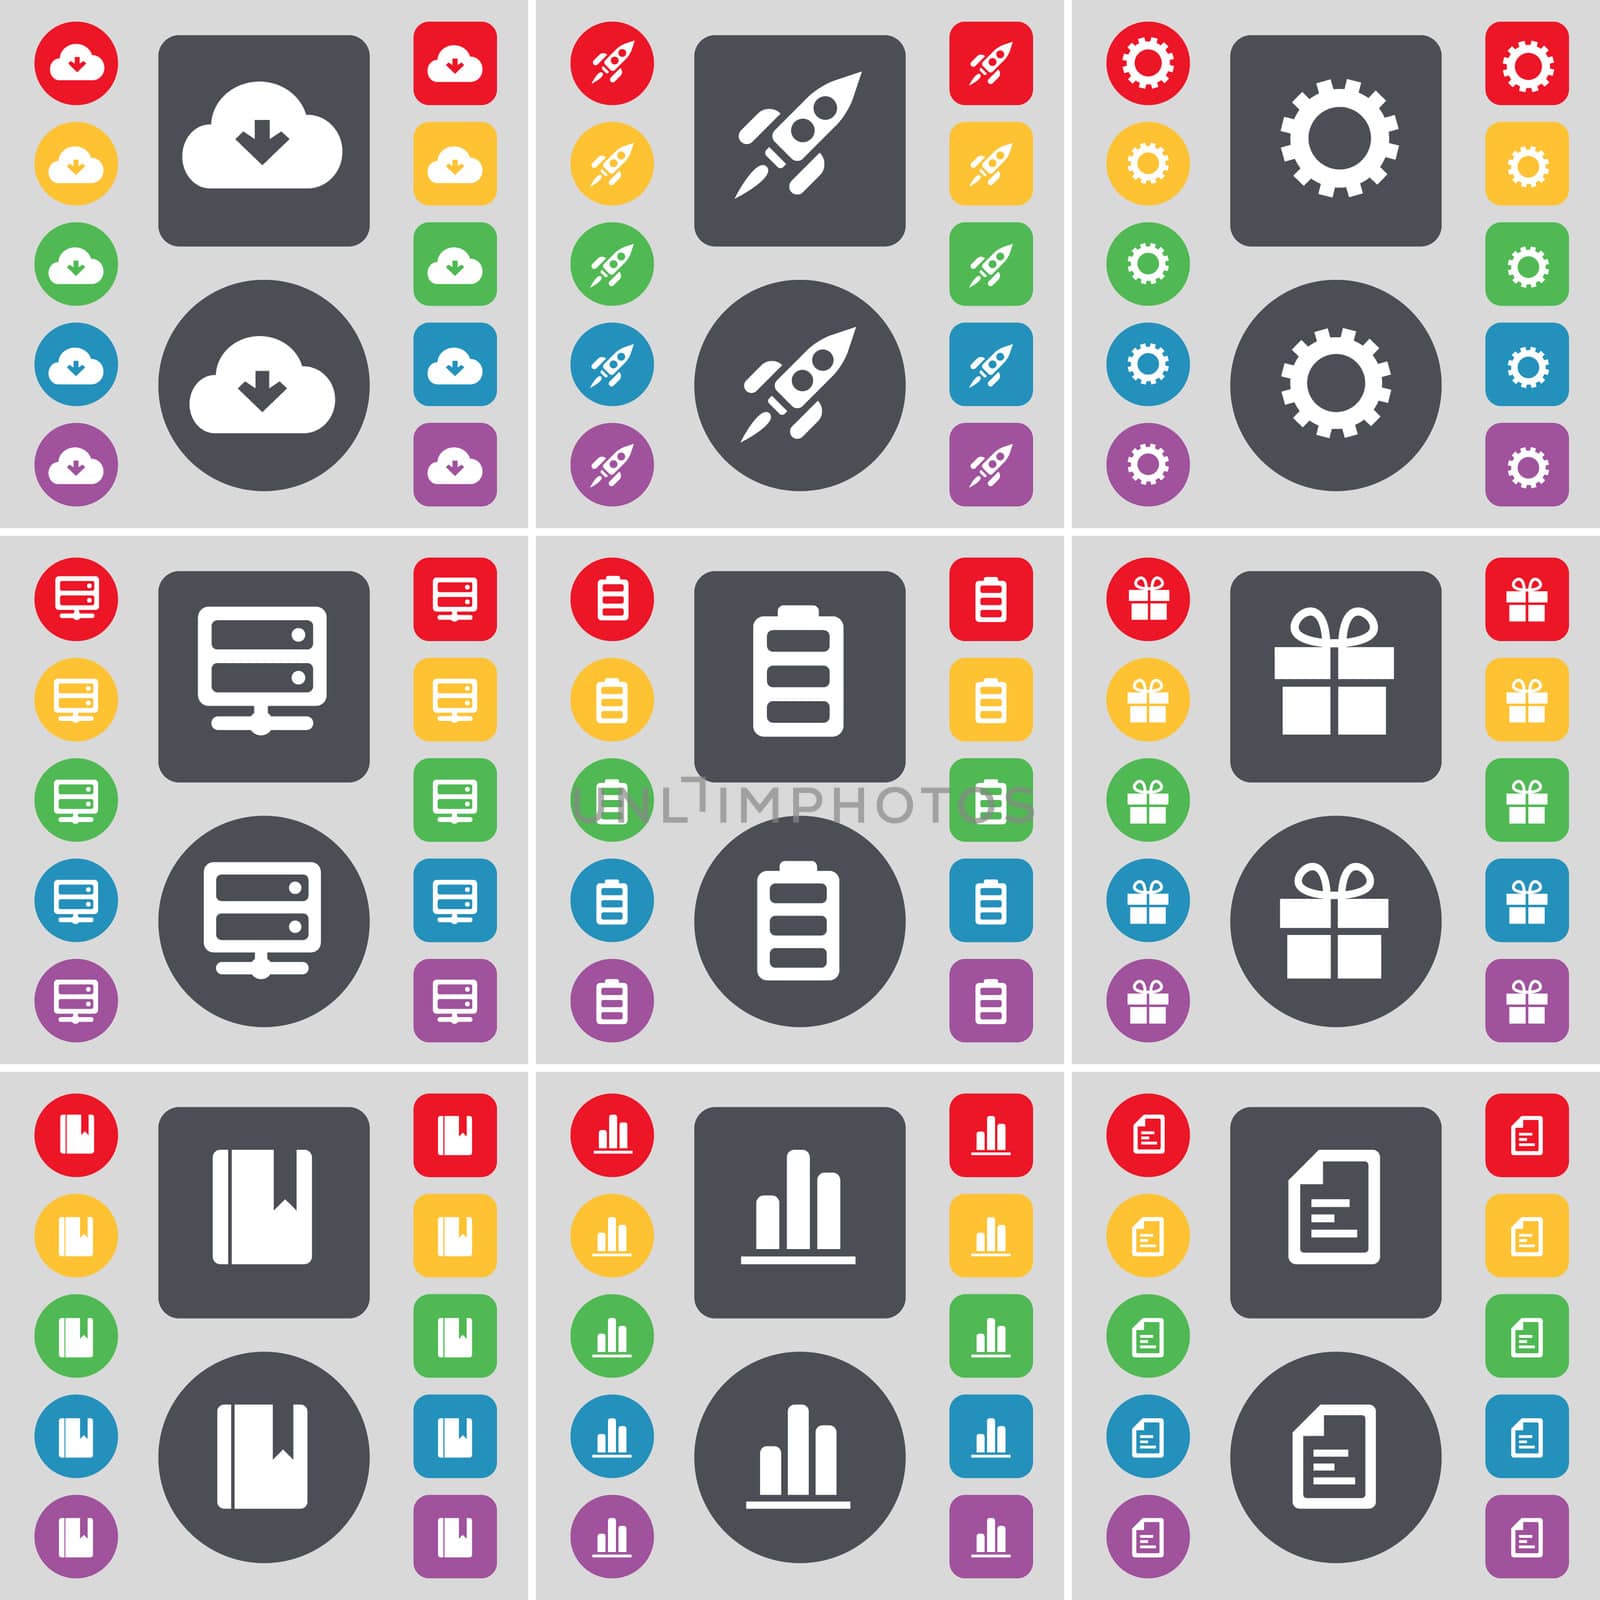 Cloud, Rocket, Gear, Server, Battery, Gift, Dictionary, Diagram, Text file icon symbol. A large set of flat, colored buttons for your design.  by serhii_lohvyniuk